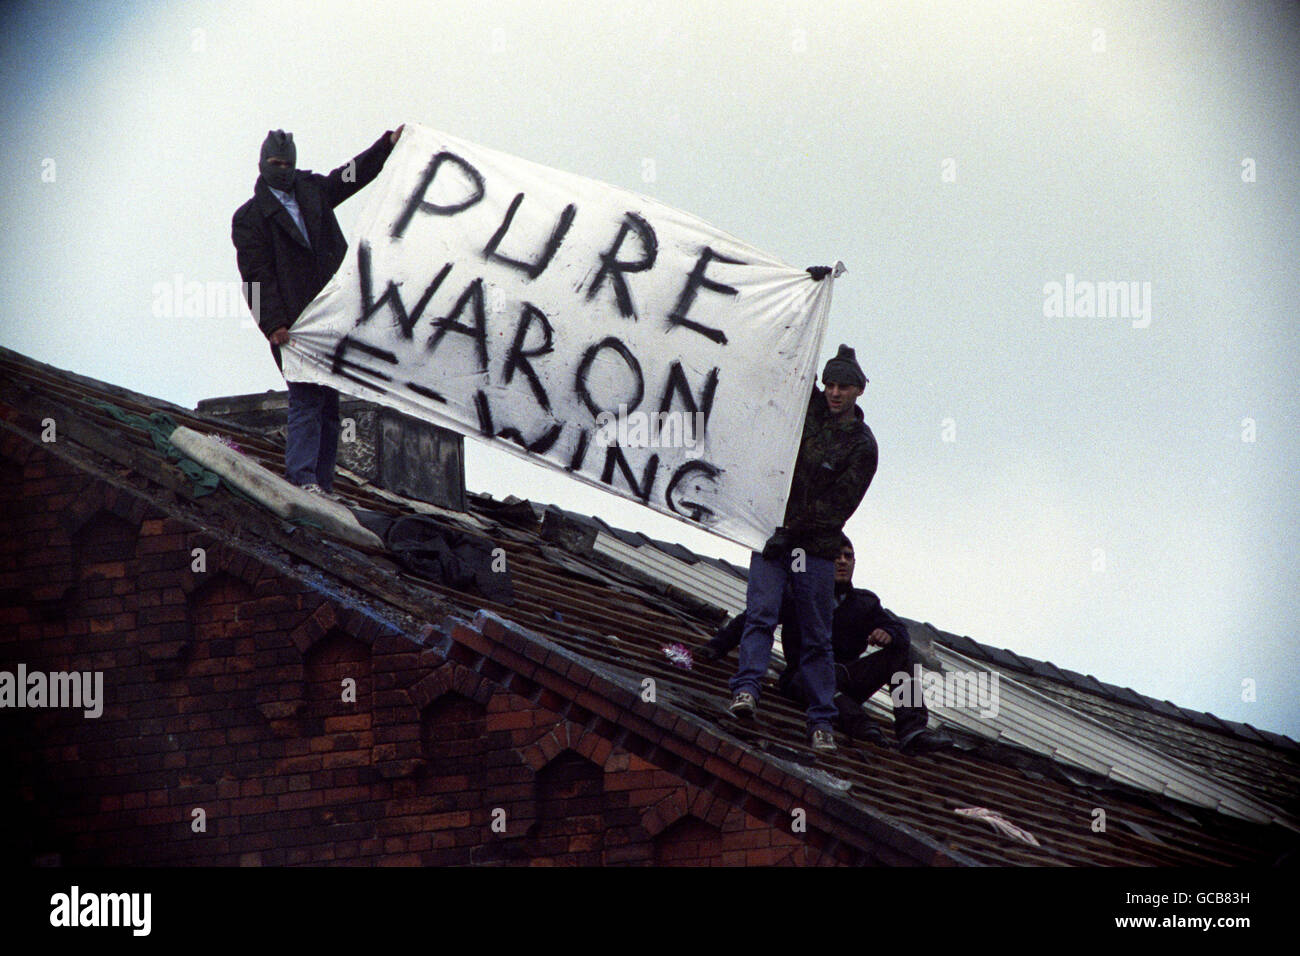 Prisoners display a banner declaring pure war on E Wing on the roof of Strangeways Prison. Stock Photo